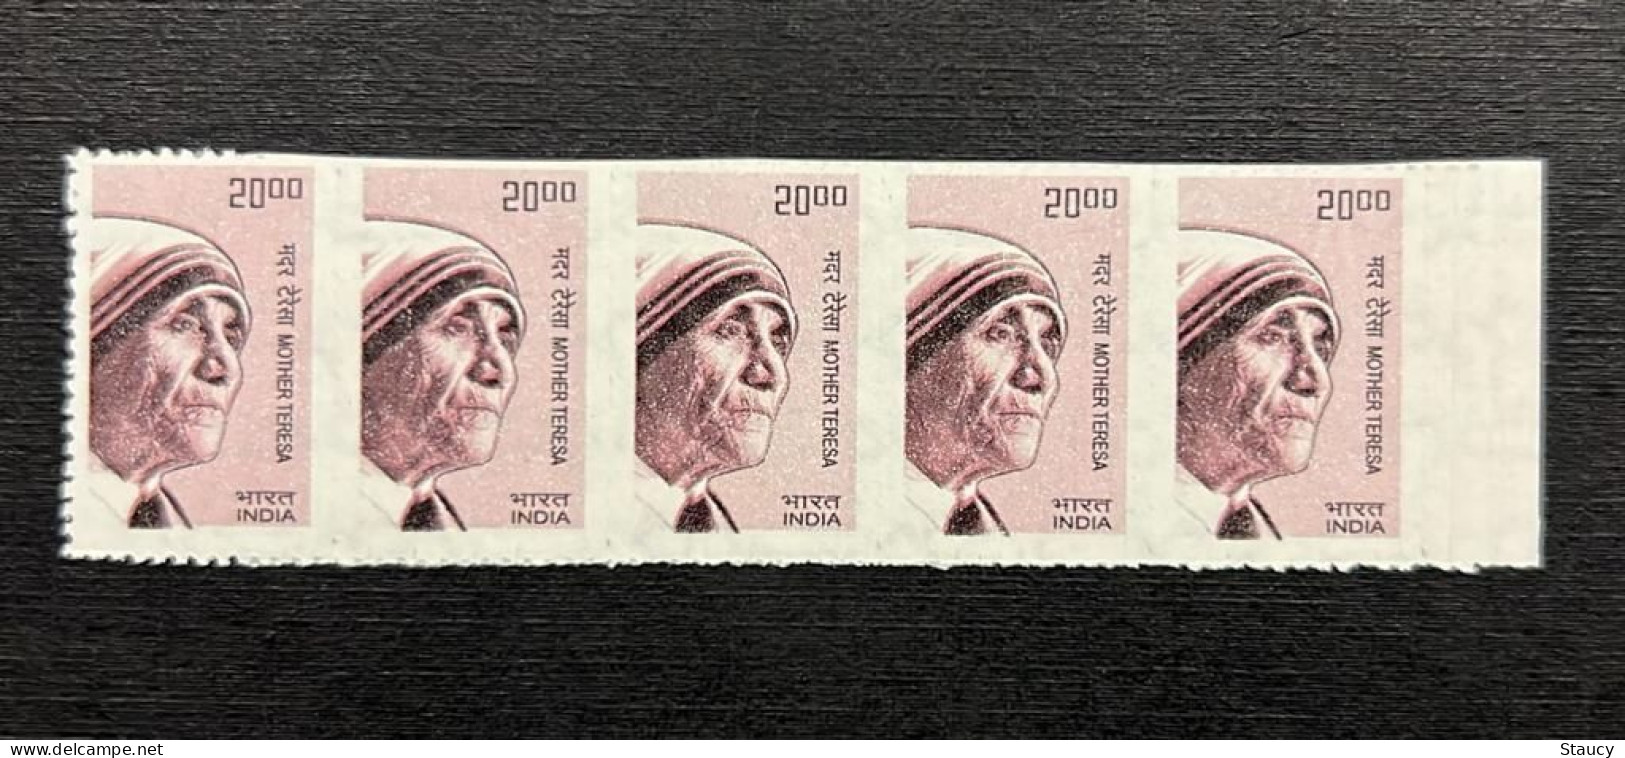 INDIA 2009 Error 10th. Definitive Series, Error "Imperf Strip Of 5 Stamps" Of "Mother Teresa" MNH As Per Scan - Variedades Y Curiosidades